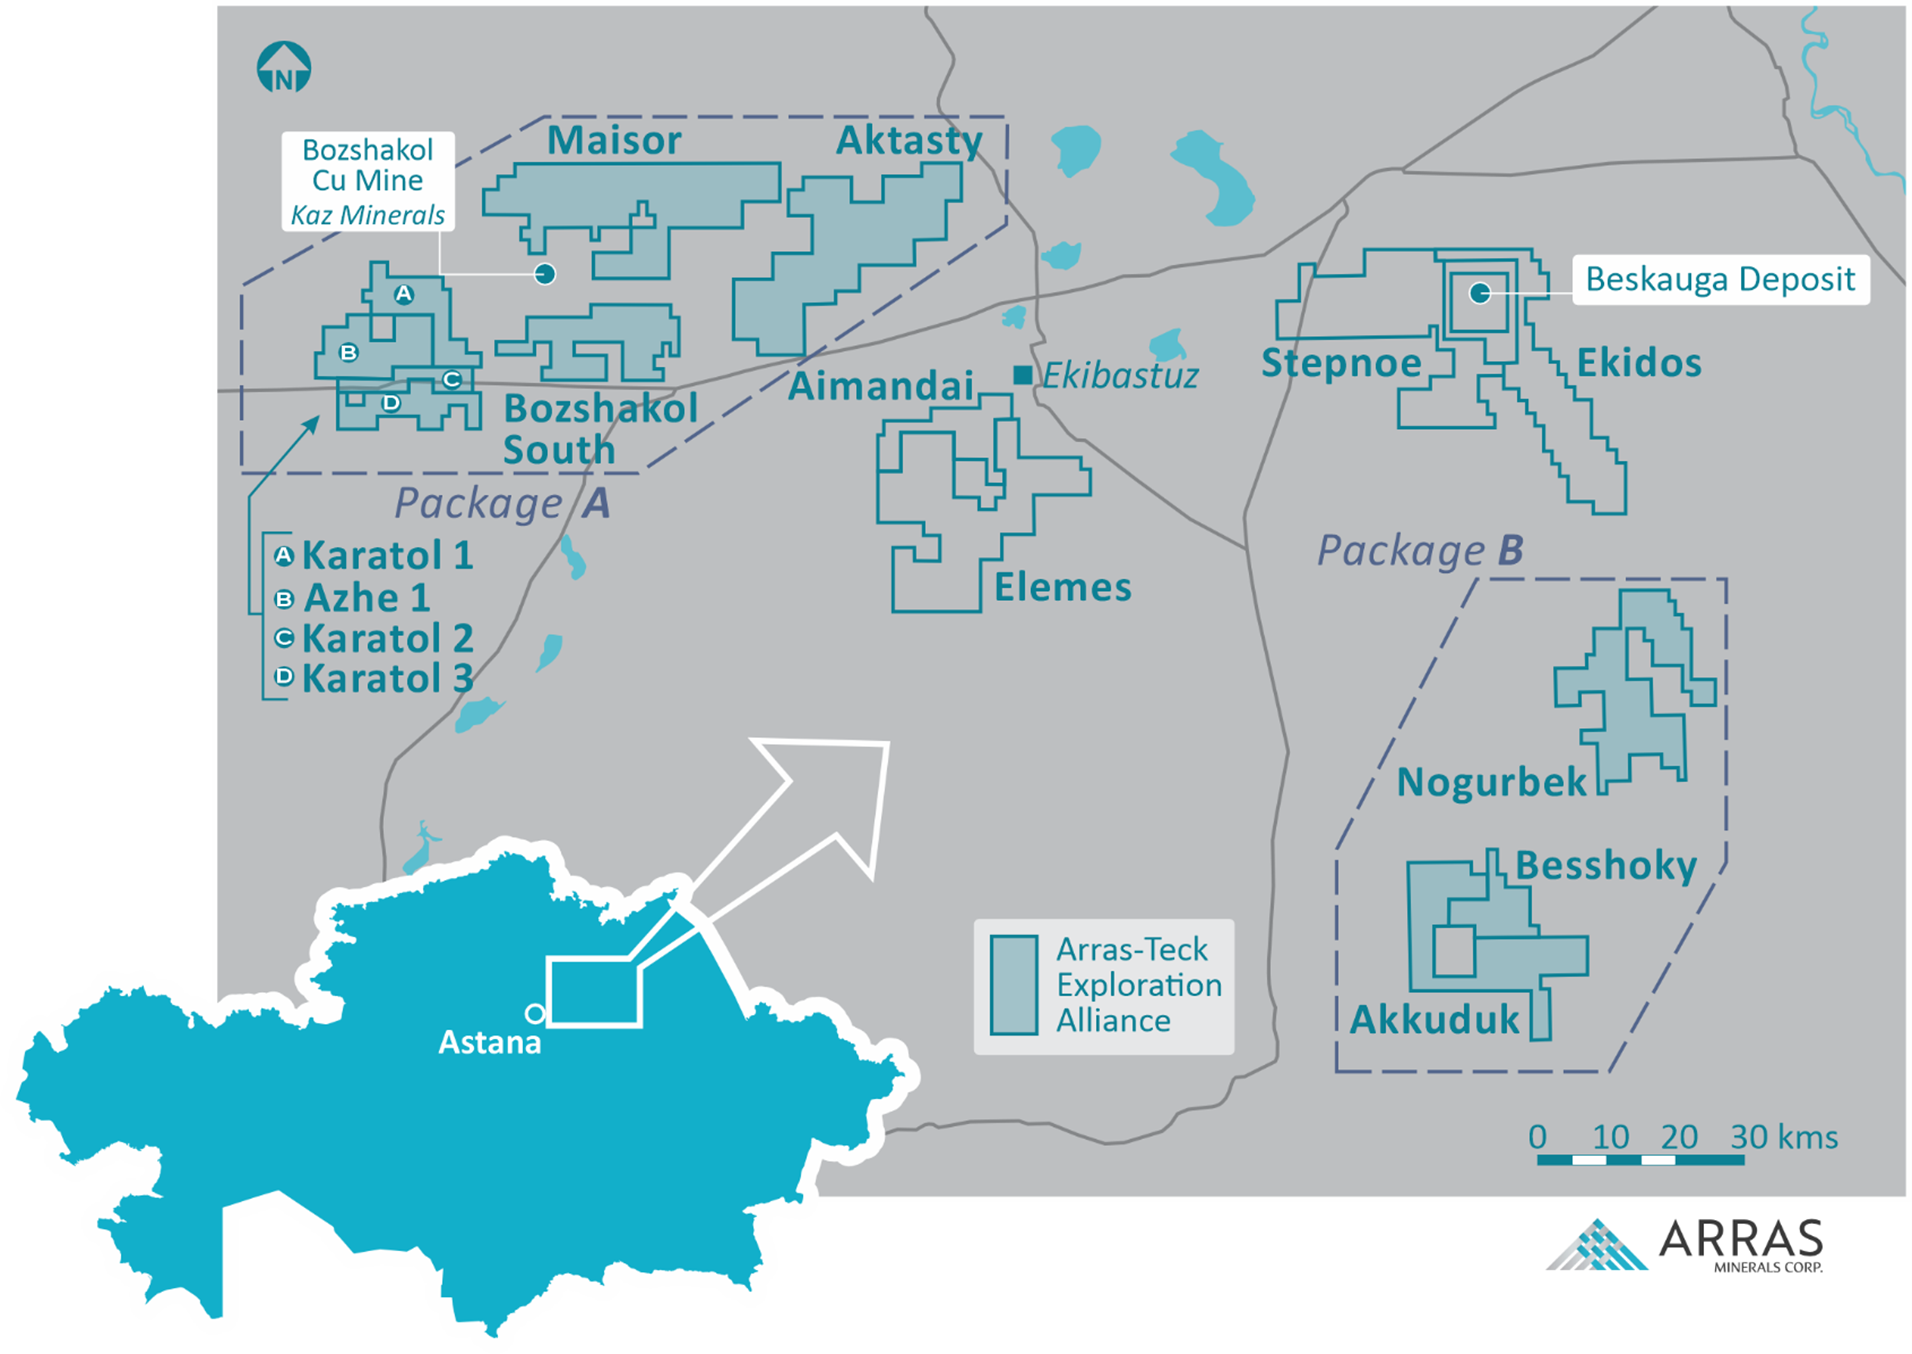 Arras’s License Package showing Arras-Teck Strategic Alliance Areas as “Package A” and “Package B” as well as the Elemes, Aimandai, Stepnoe, & Ekidos licences which are 100% owned by Arras.